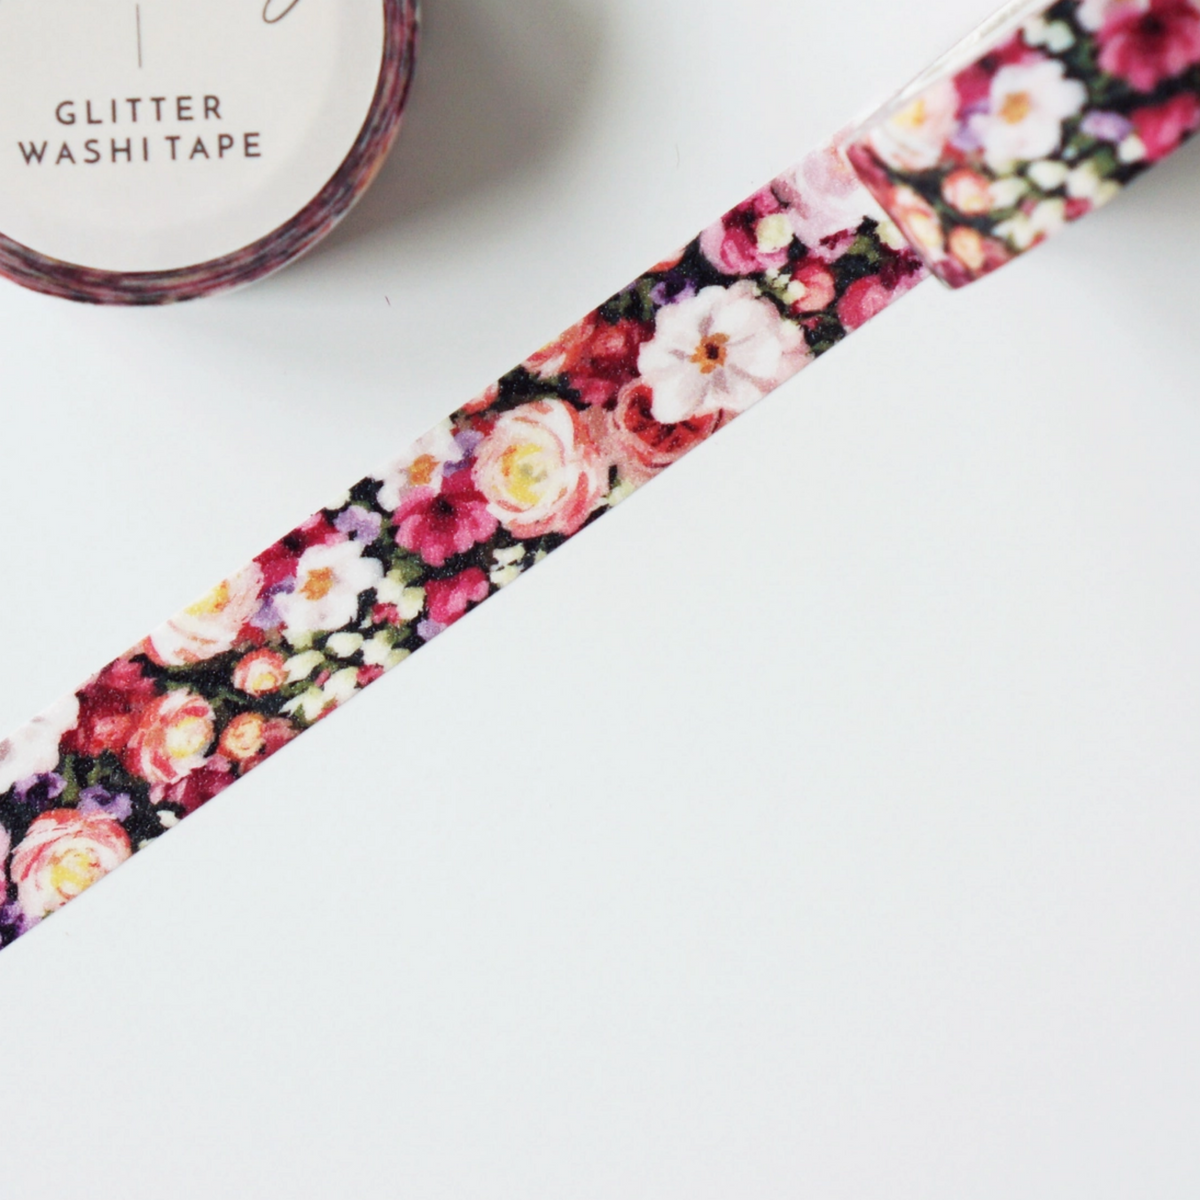 Glitter Floral Washi Tape Flower Washi Tape By Ginably